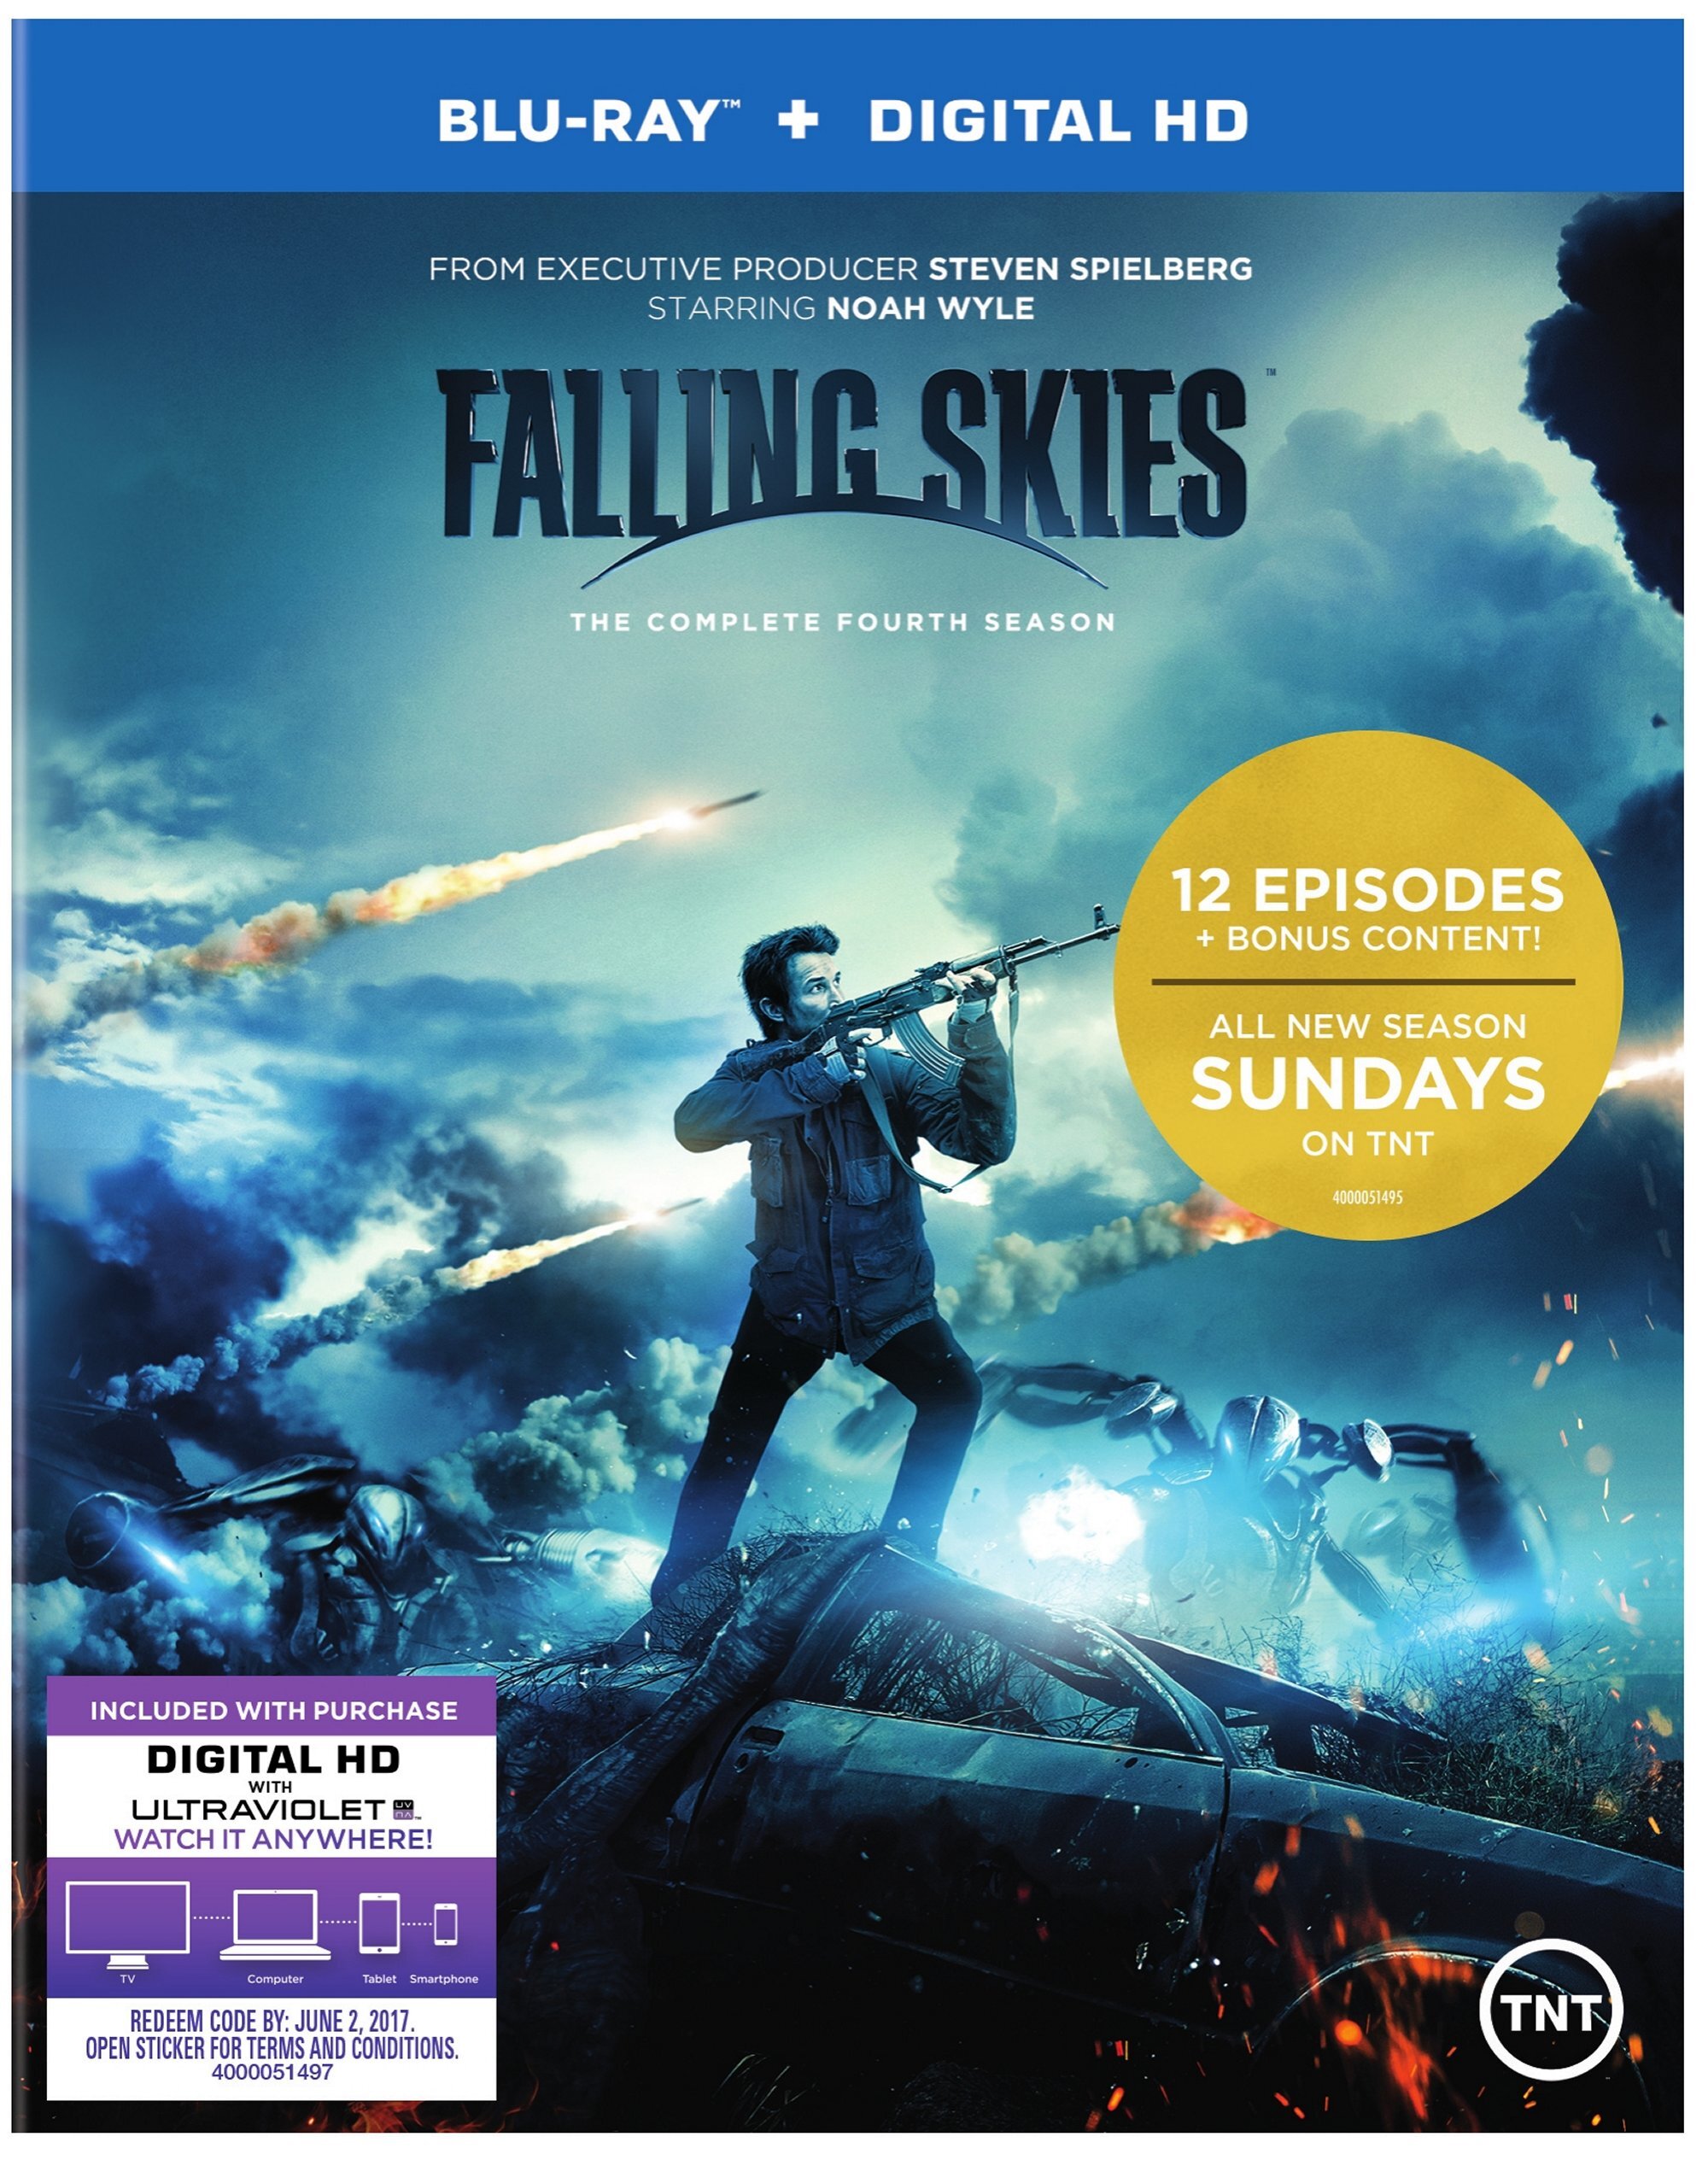 Falling Skies: The Complete Fourth Season - Blu-ray [ 2014 ]  - Sci Fi Television On Blu-ray - TV Shows On GRUV